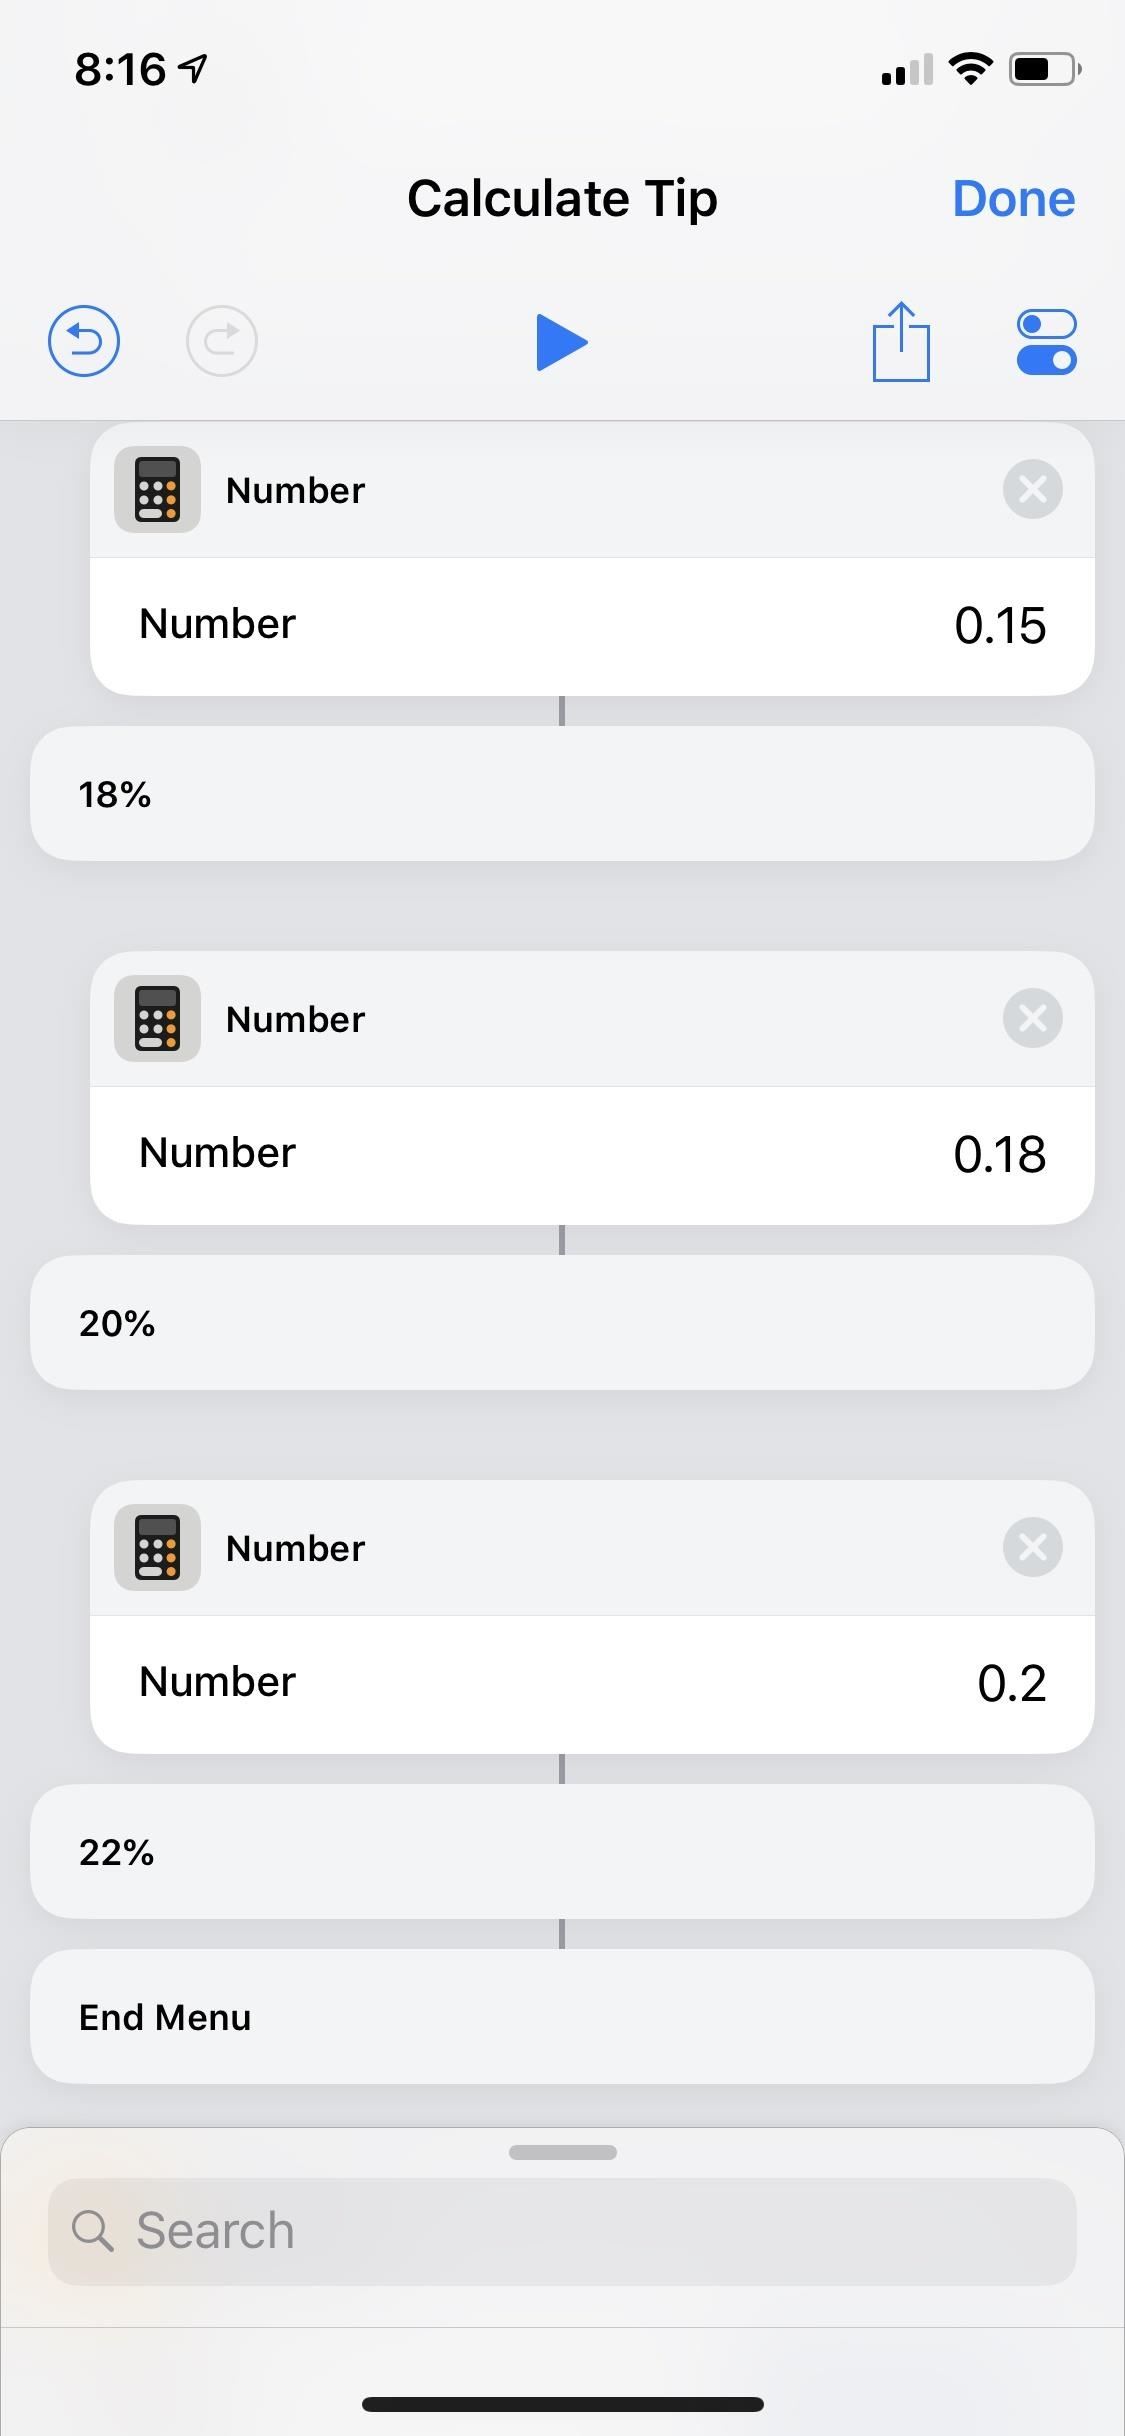 Calculate Tips Faster on Your iPhone Using the Shortcuts App